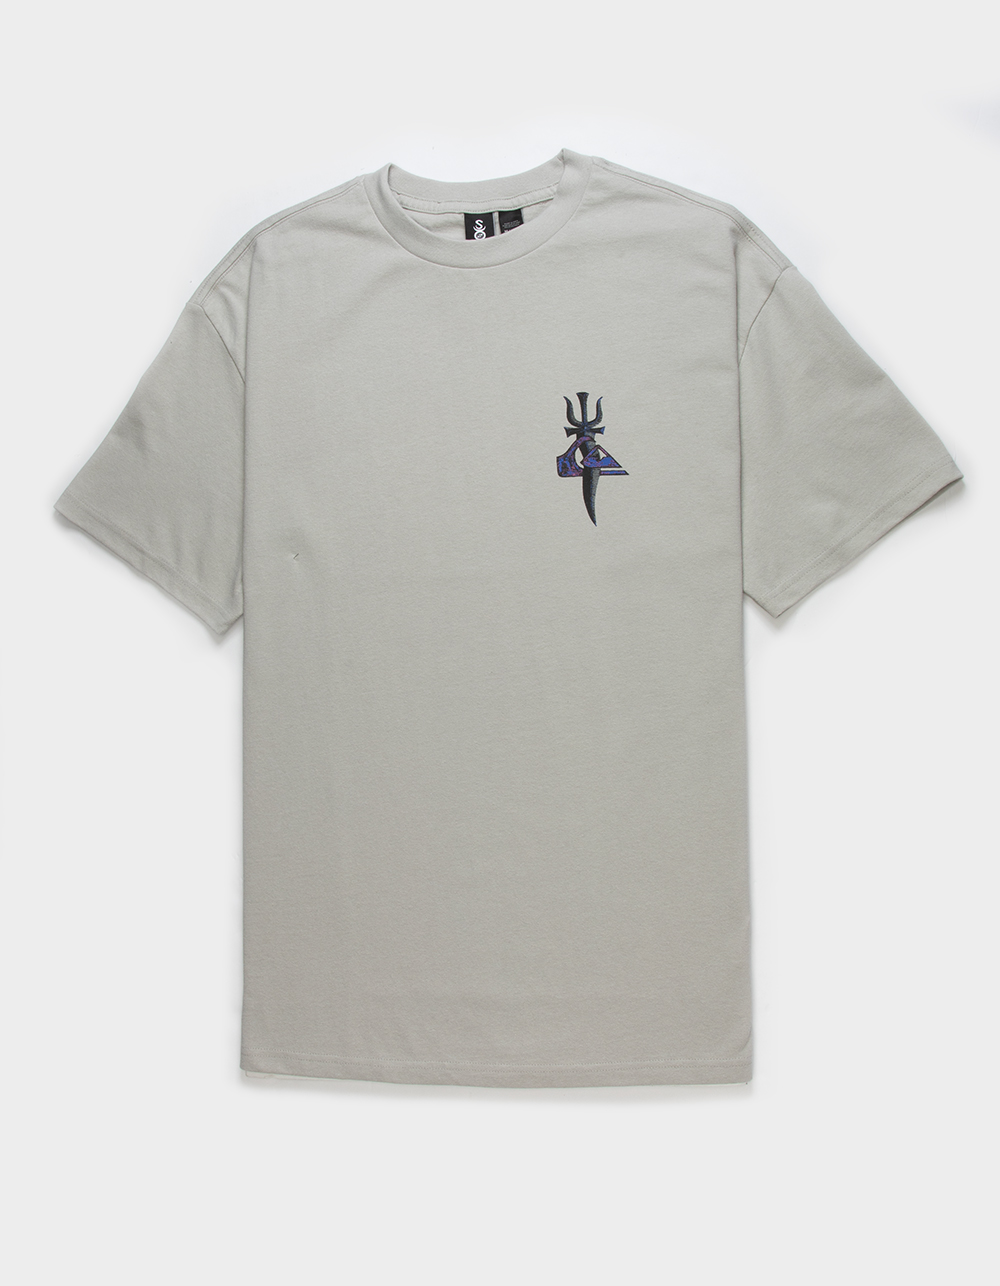 QUIKSILVER x Surfers Of Fortune Tridagger Mens Tee - GRAY | Tillys